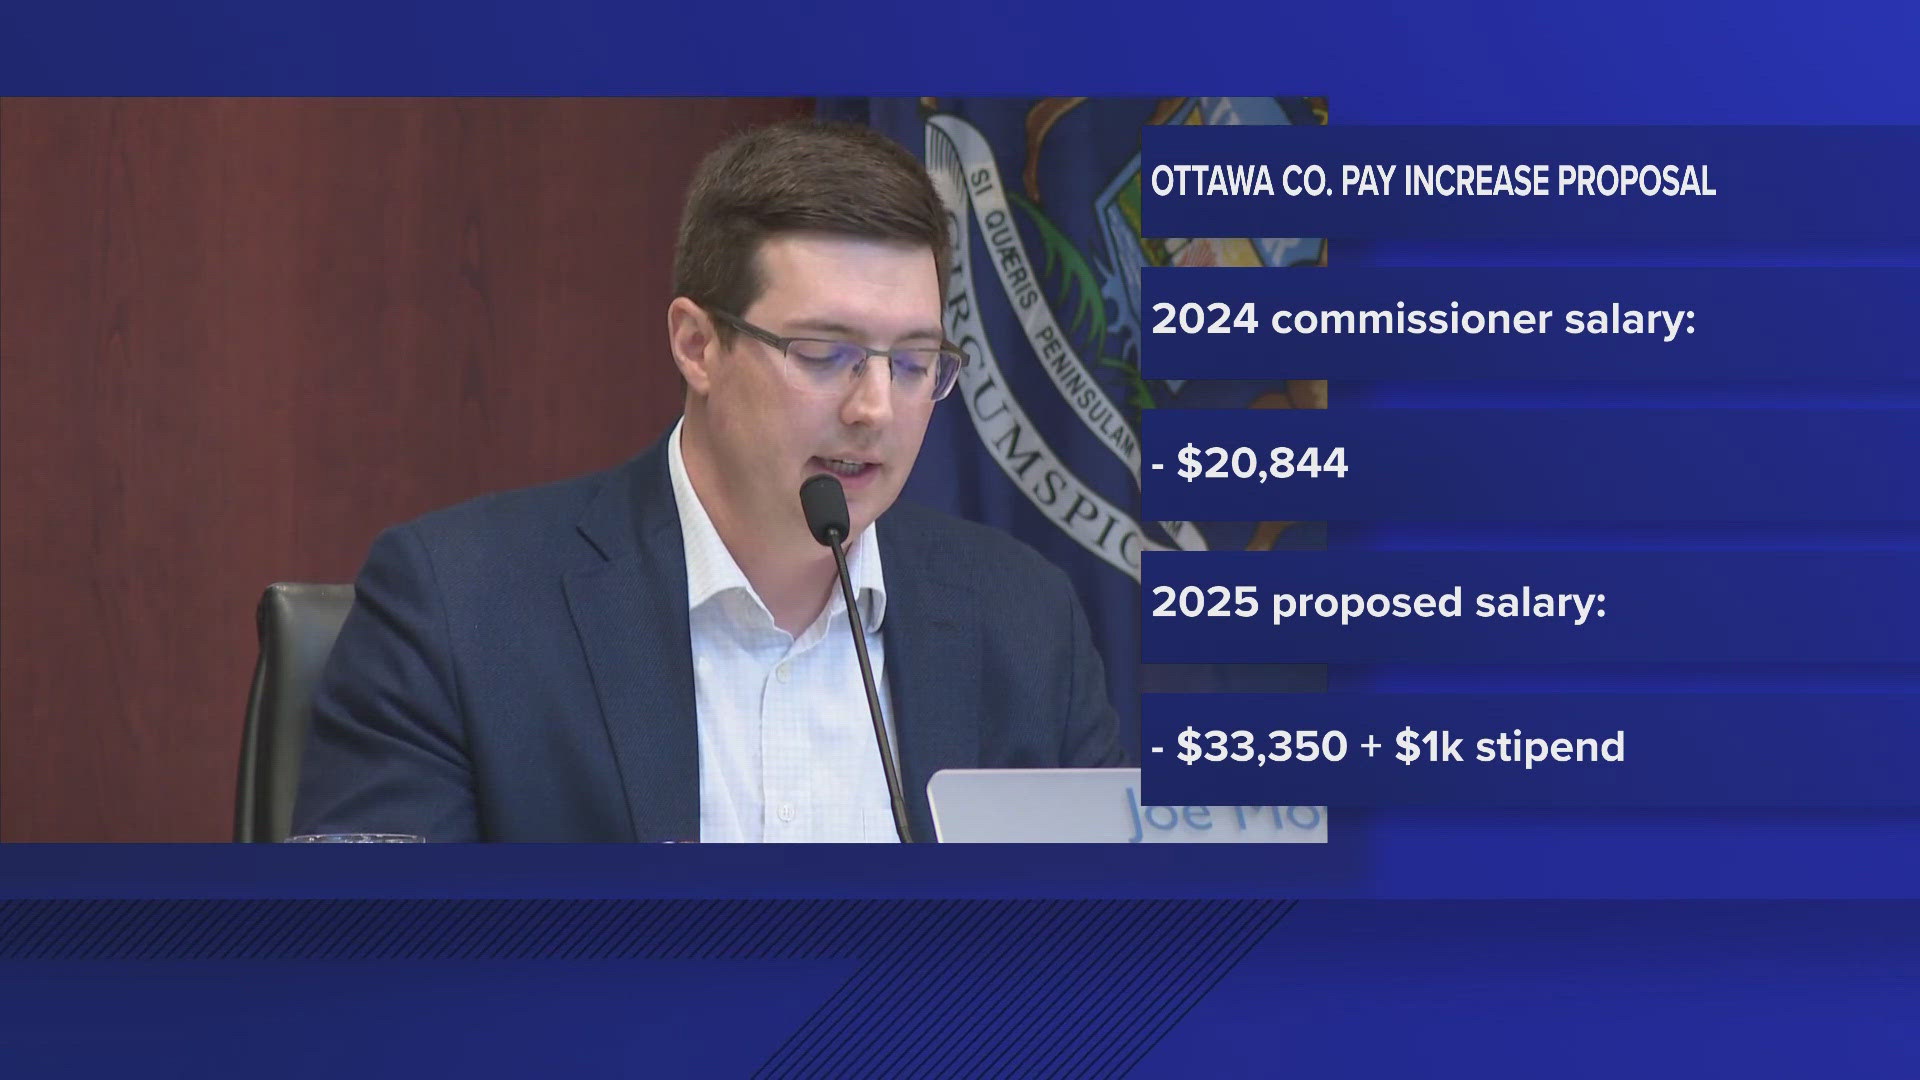 EDITOR'S NOTE: The Ottawa Co. Officers' Compensation Commission's 60% pay raise resolution was later found invalid, according to the Board of Commissioners chair.